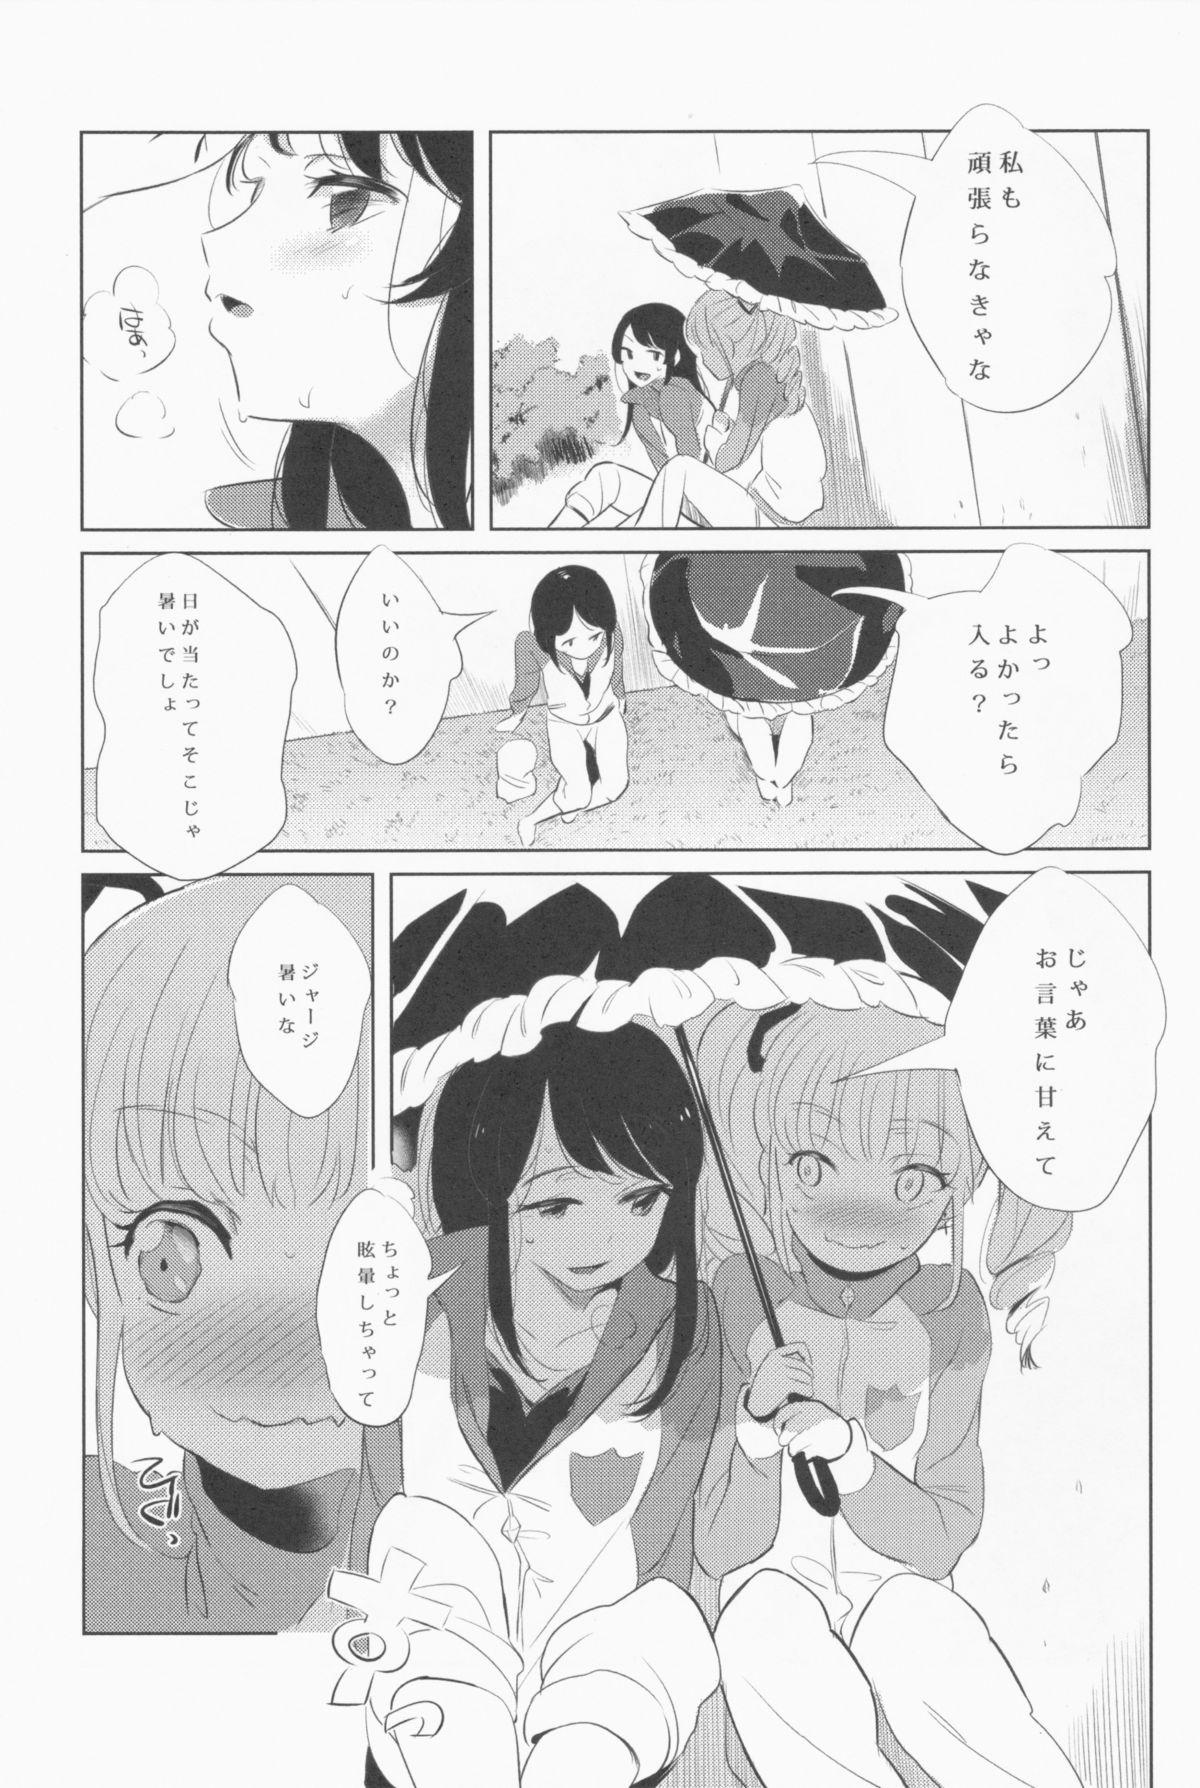 Little Wednesday/June/14/Am:11:00 - Aikatsu Pussy Eating - Page 9